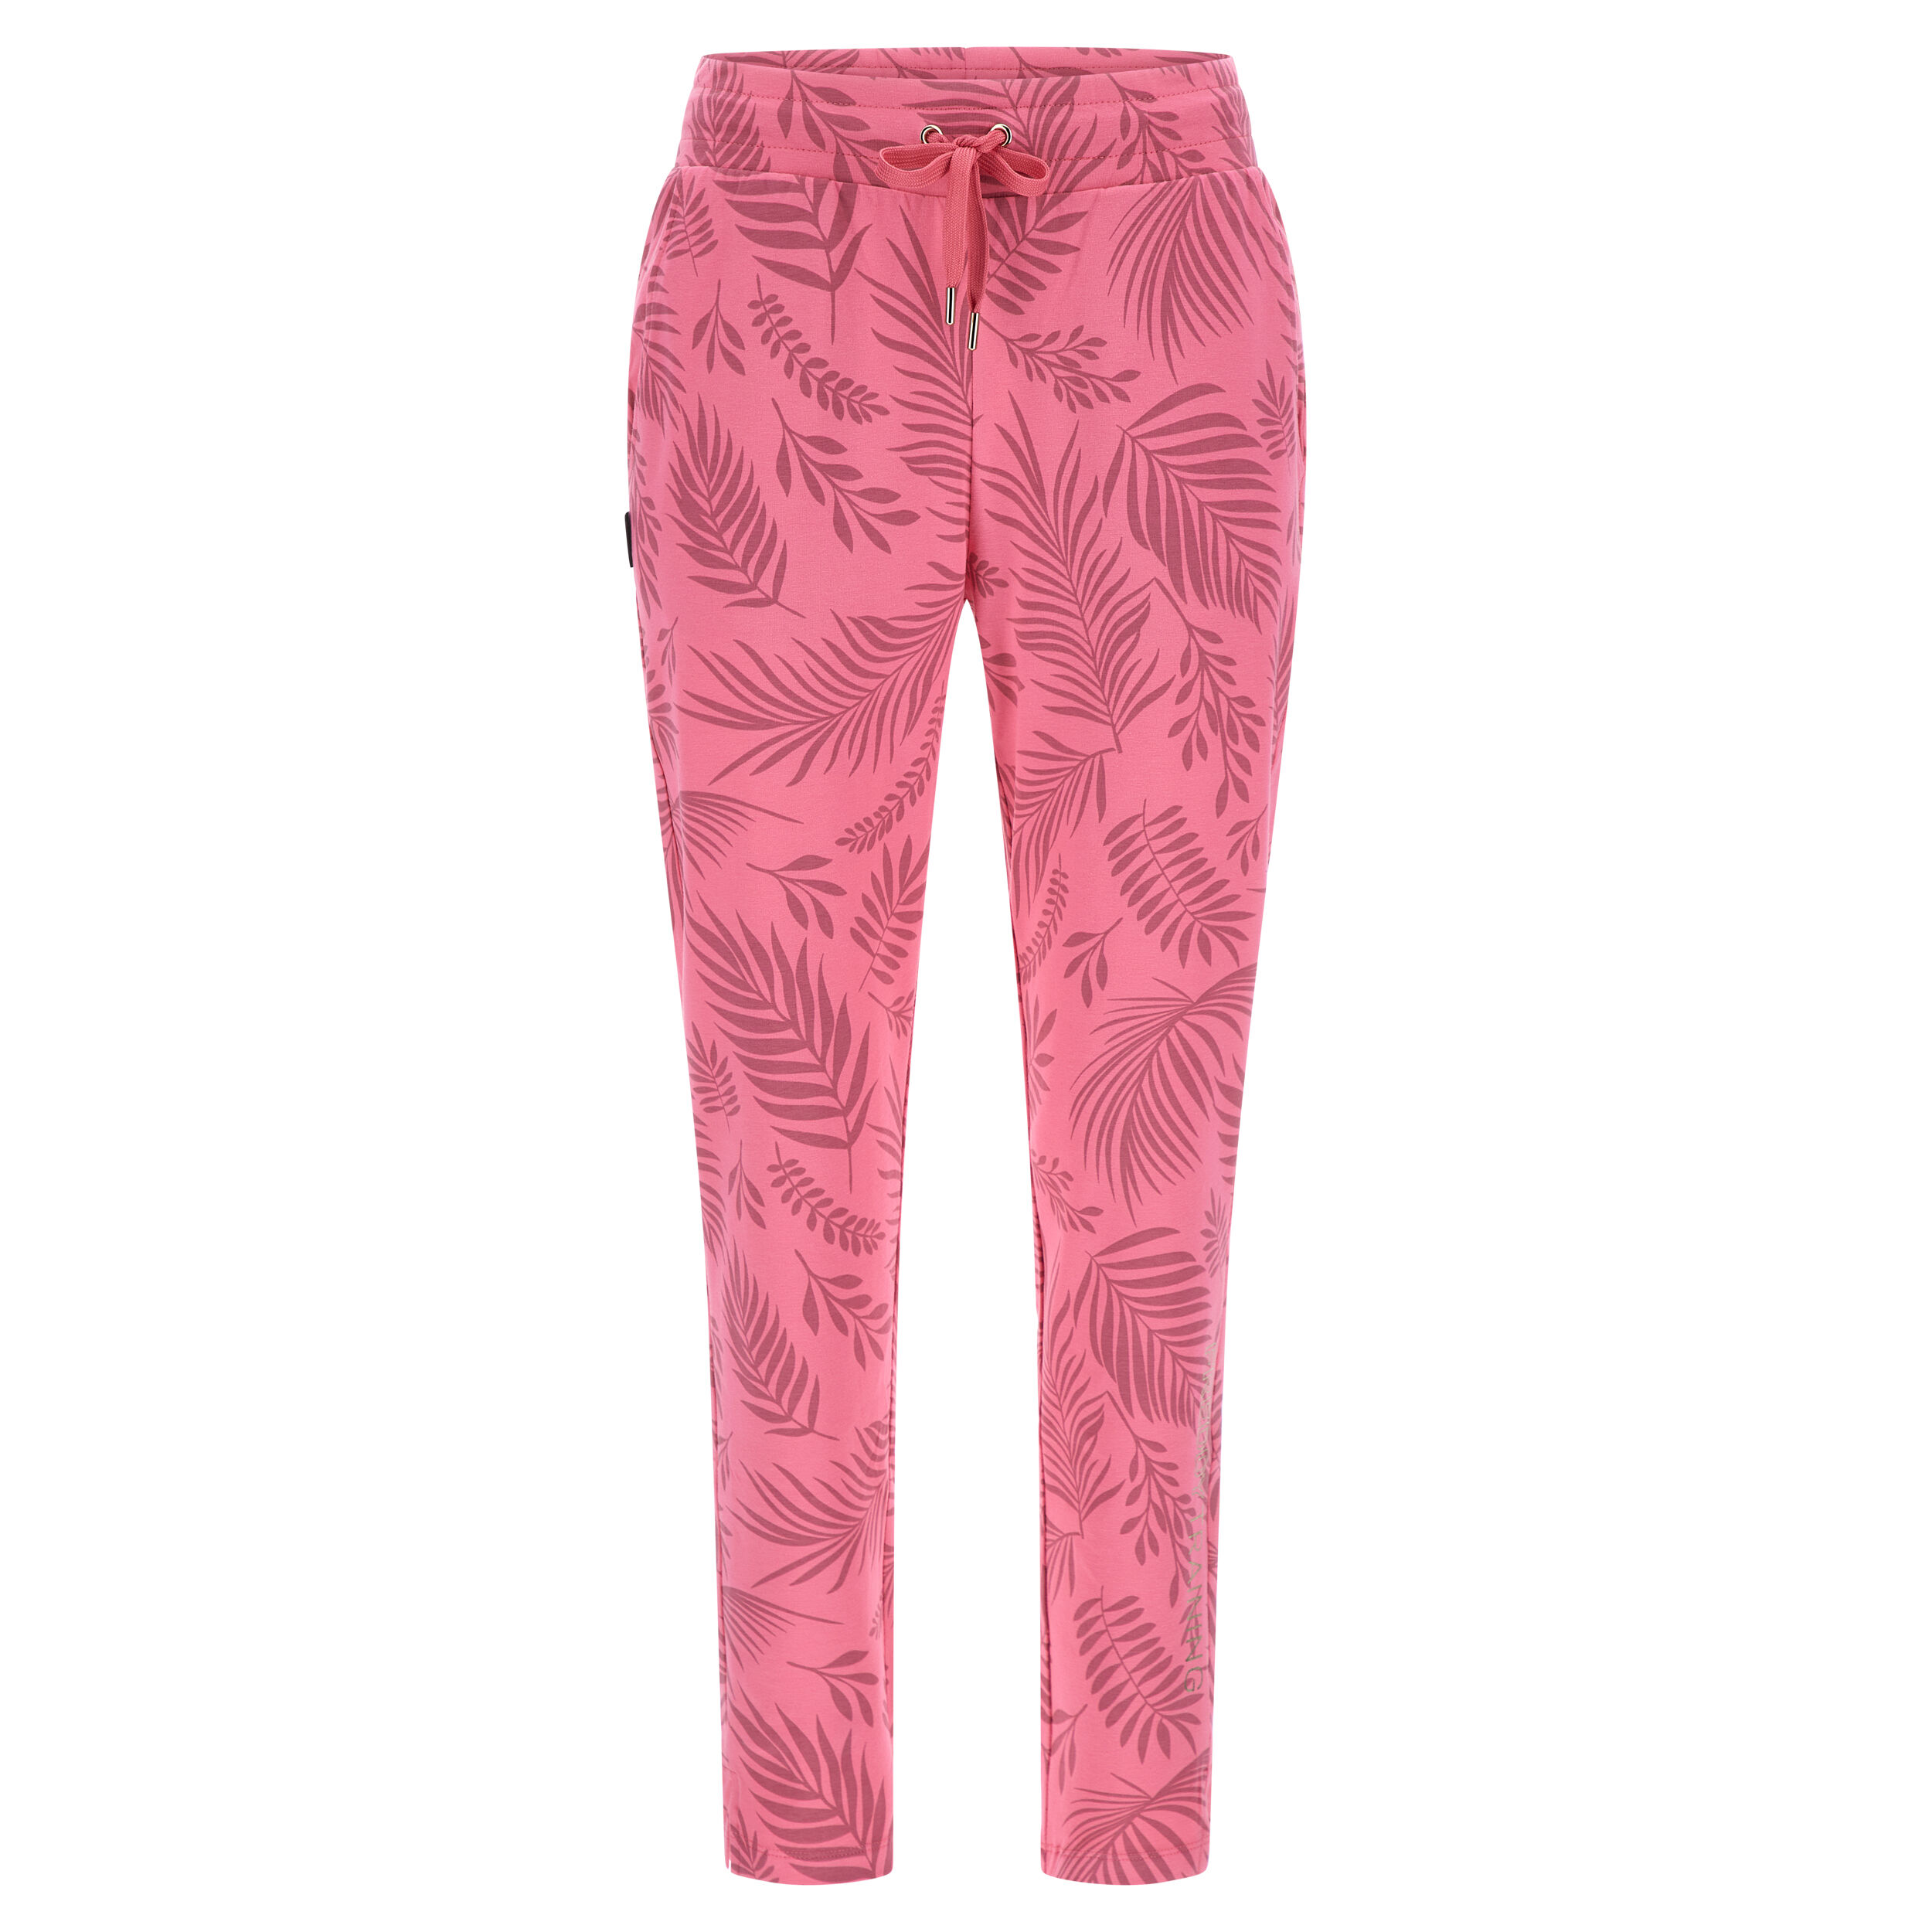 Freddy Pantaloni sportivi con stampa tropicale all over Allover Leaves Pink Donna Large